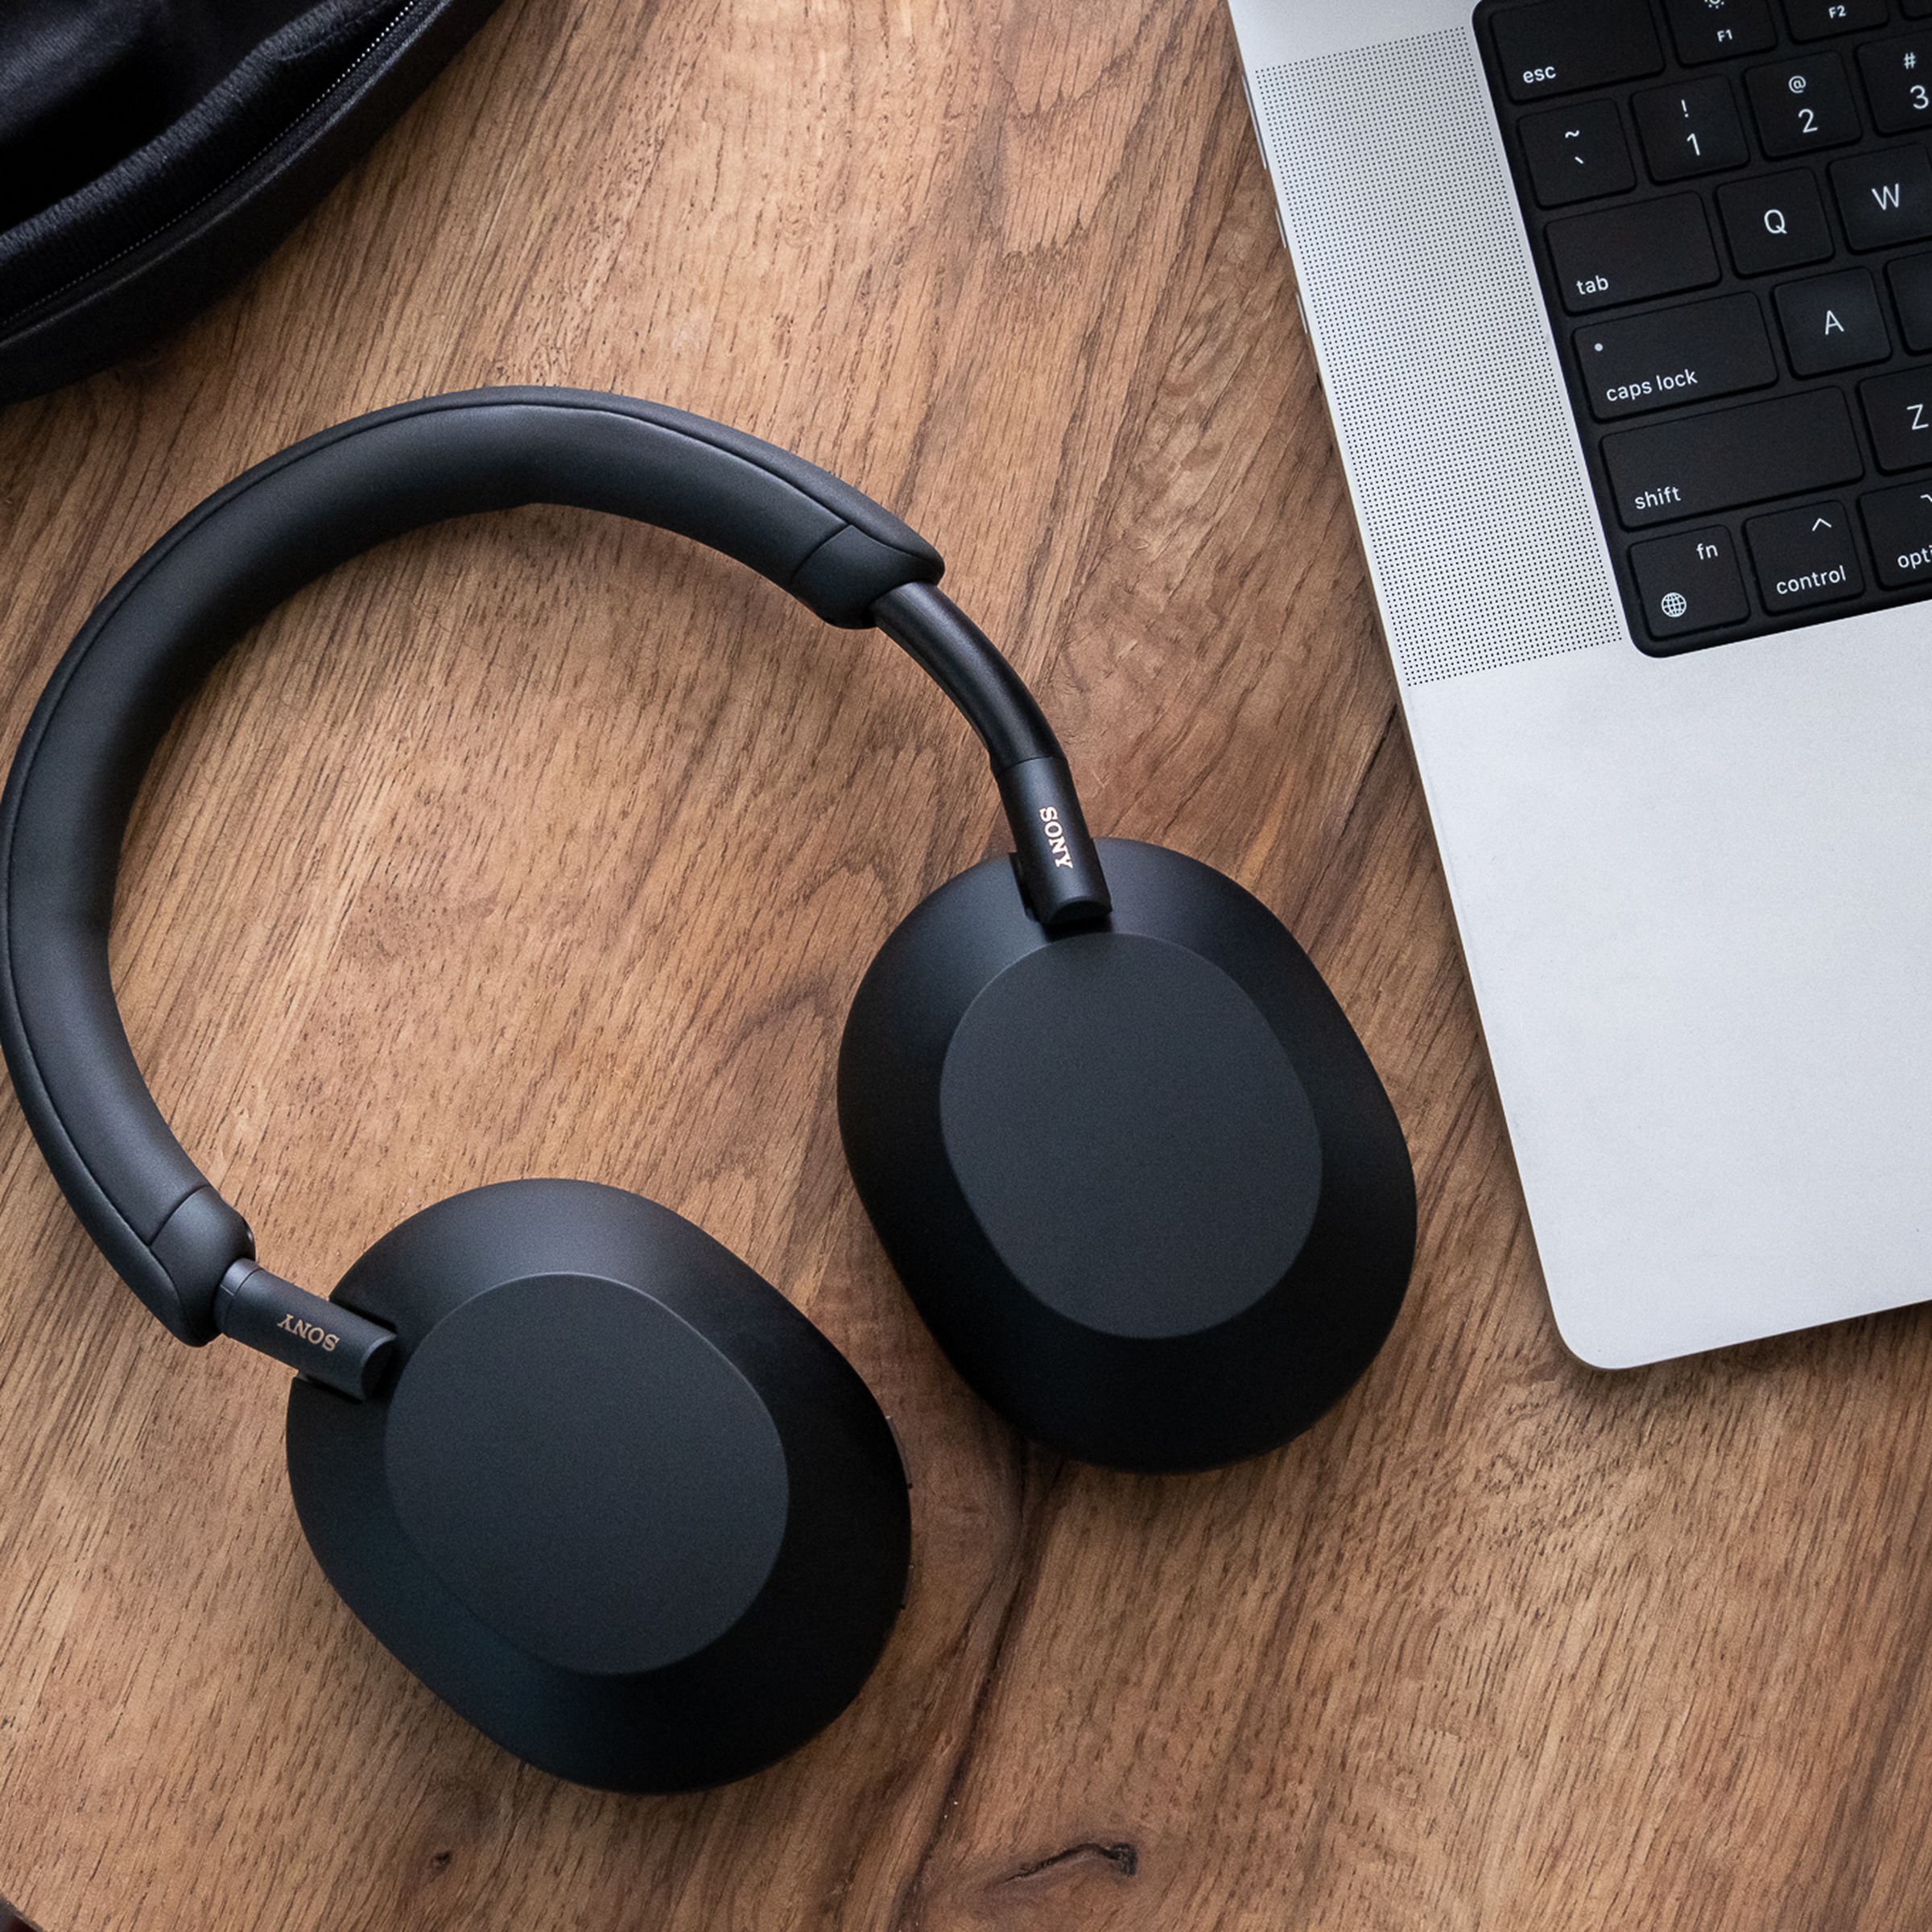 A pair of Sony WH-1000XM5 headphones, in black, resting flat on a wood table beside a laptop.